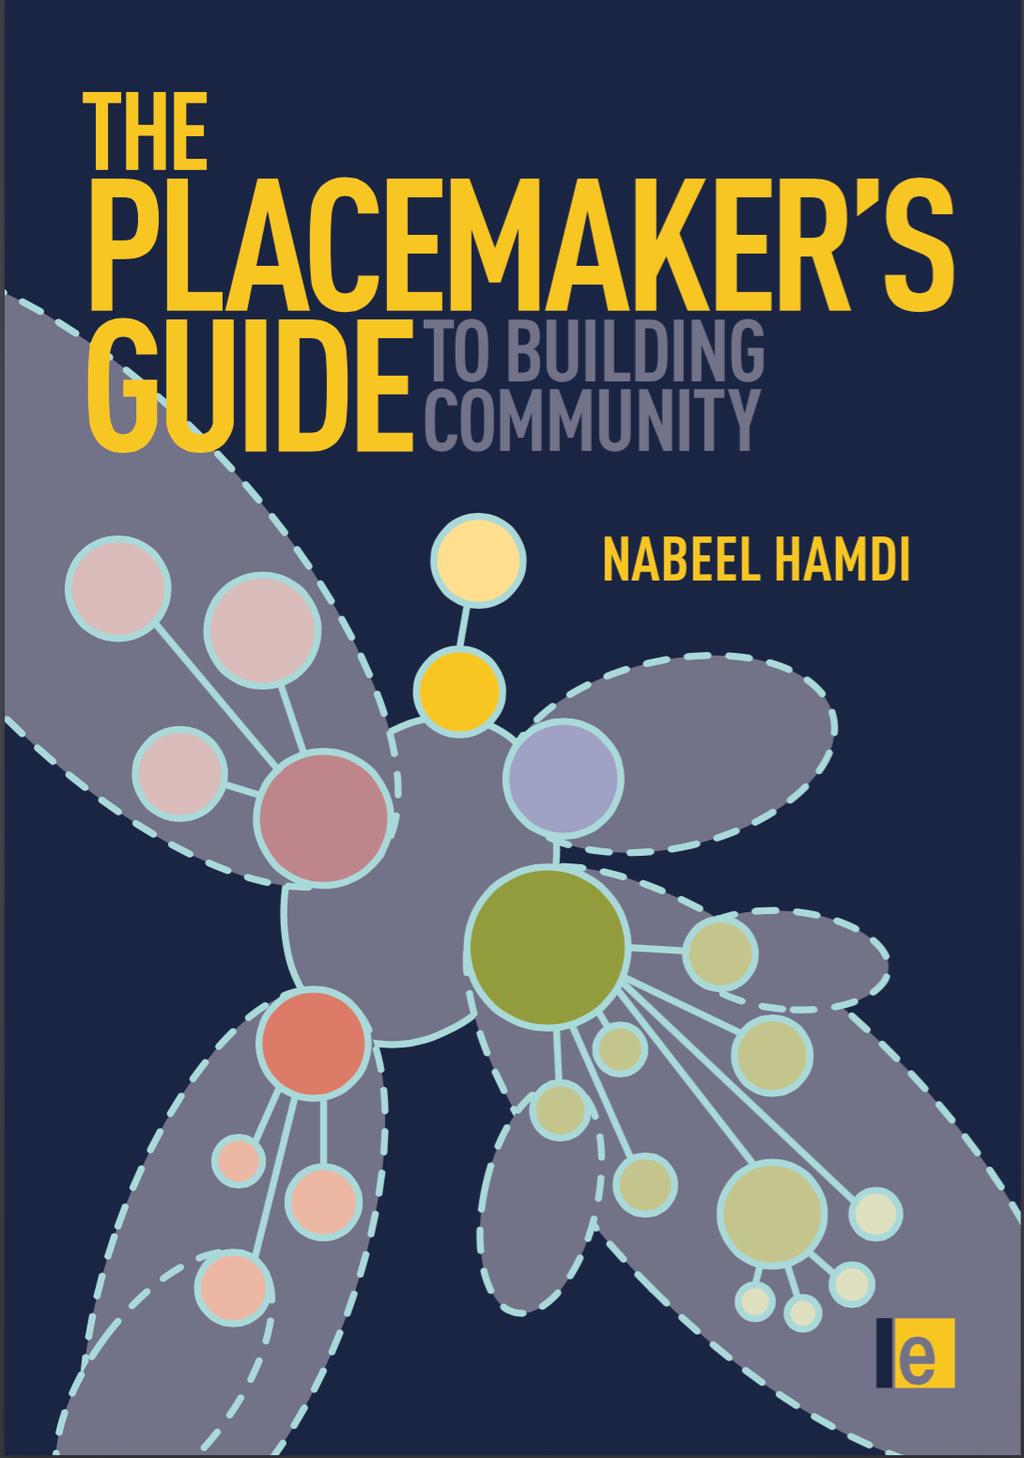 Learnings from The Placemaker s Guide 1950s-60s In the early 1950s and 1960s, the need for reform in housing and urban settlements was largely driven by the desire to build a new Utopia, free of